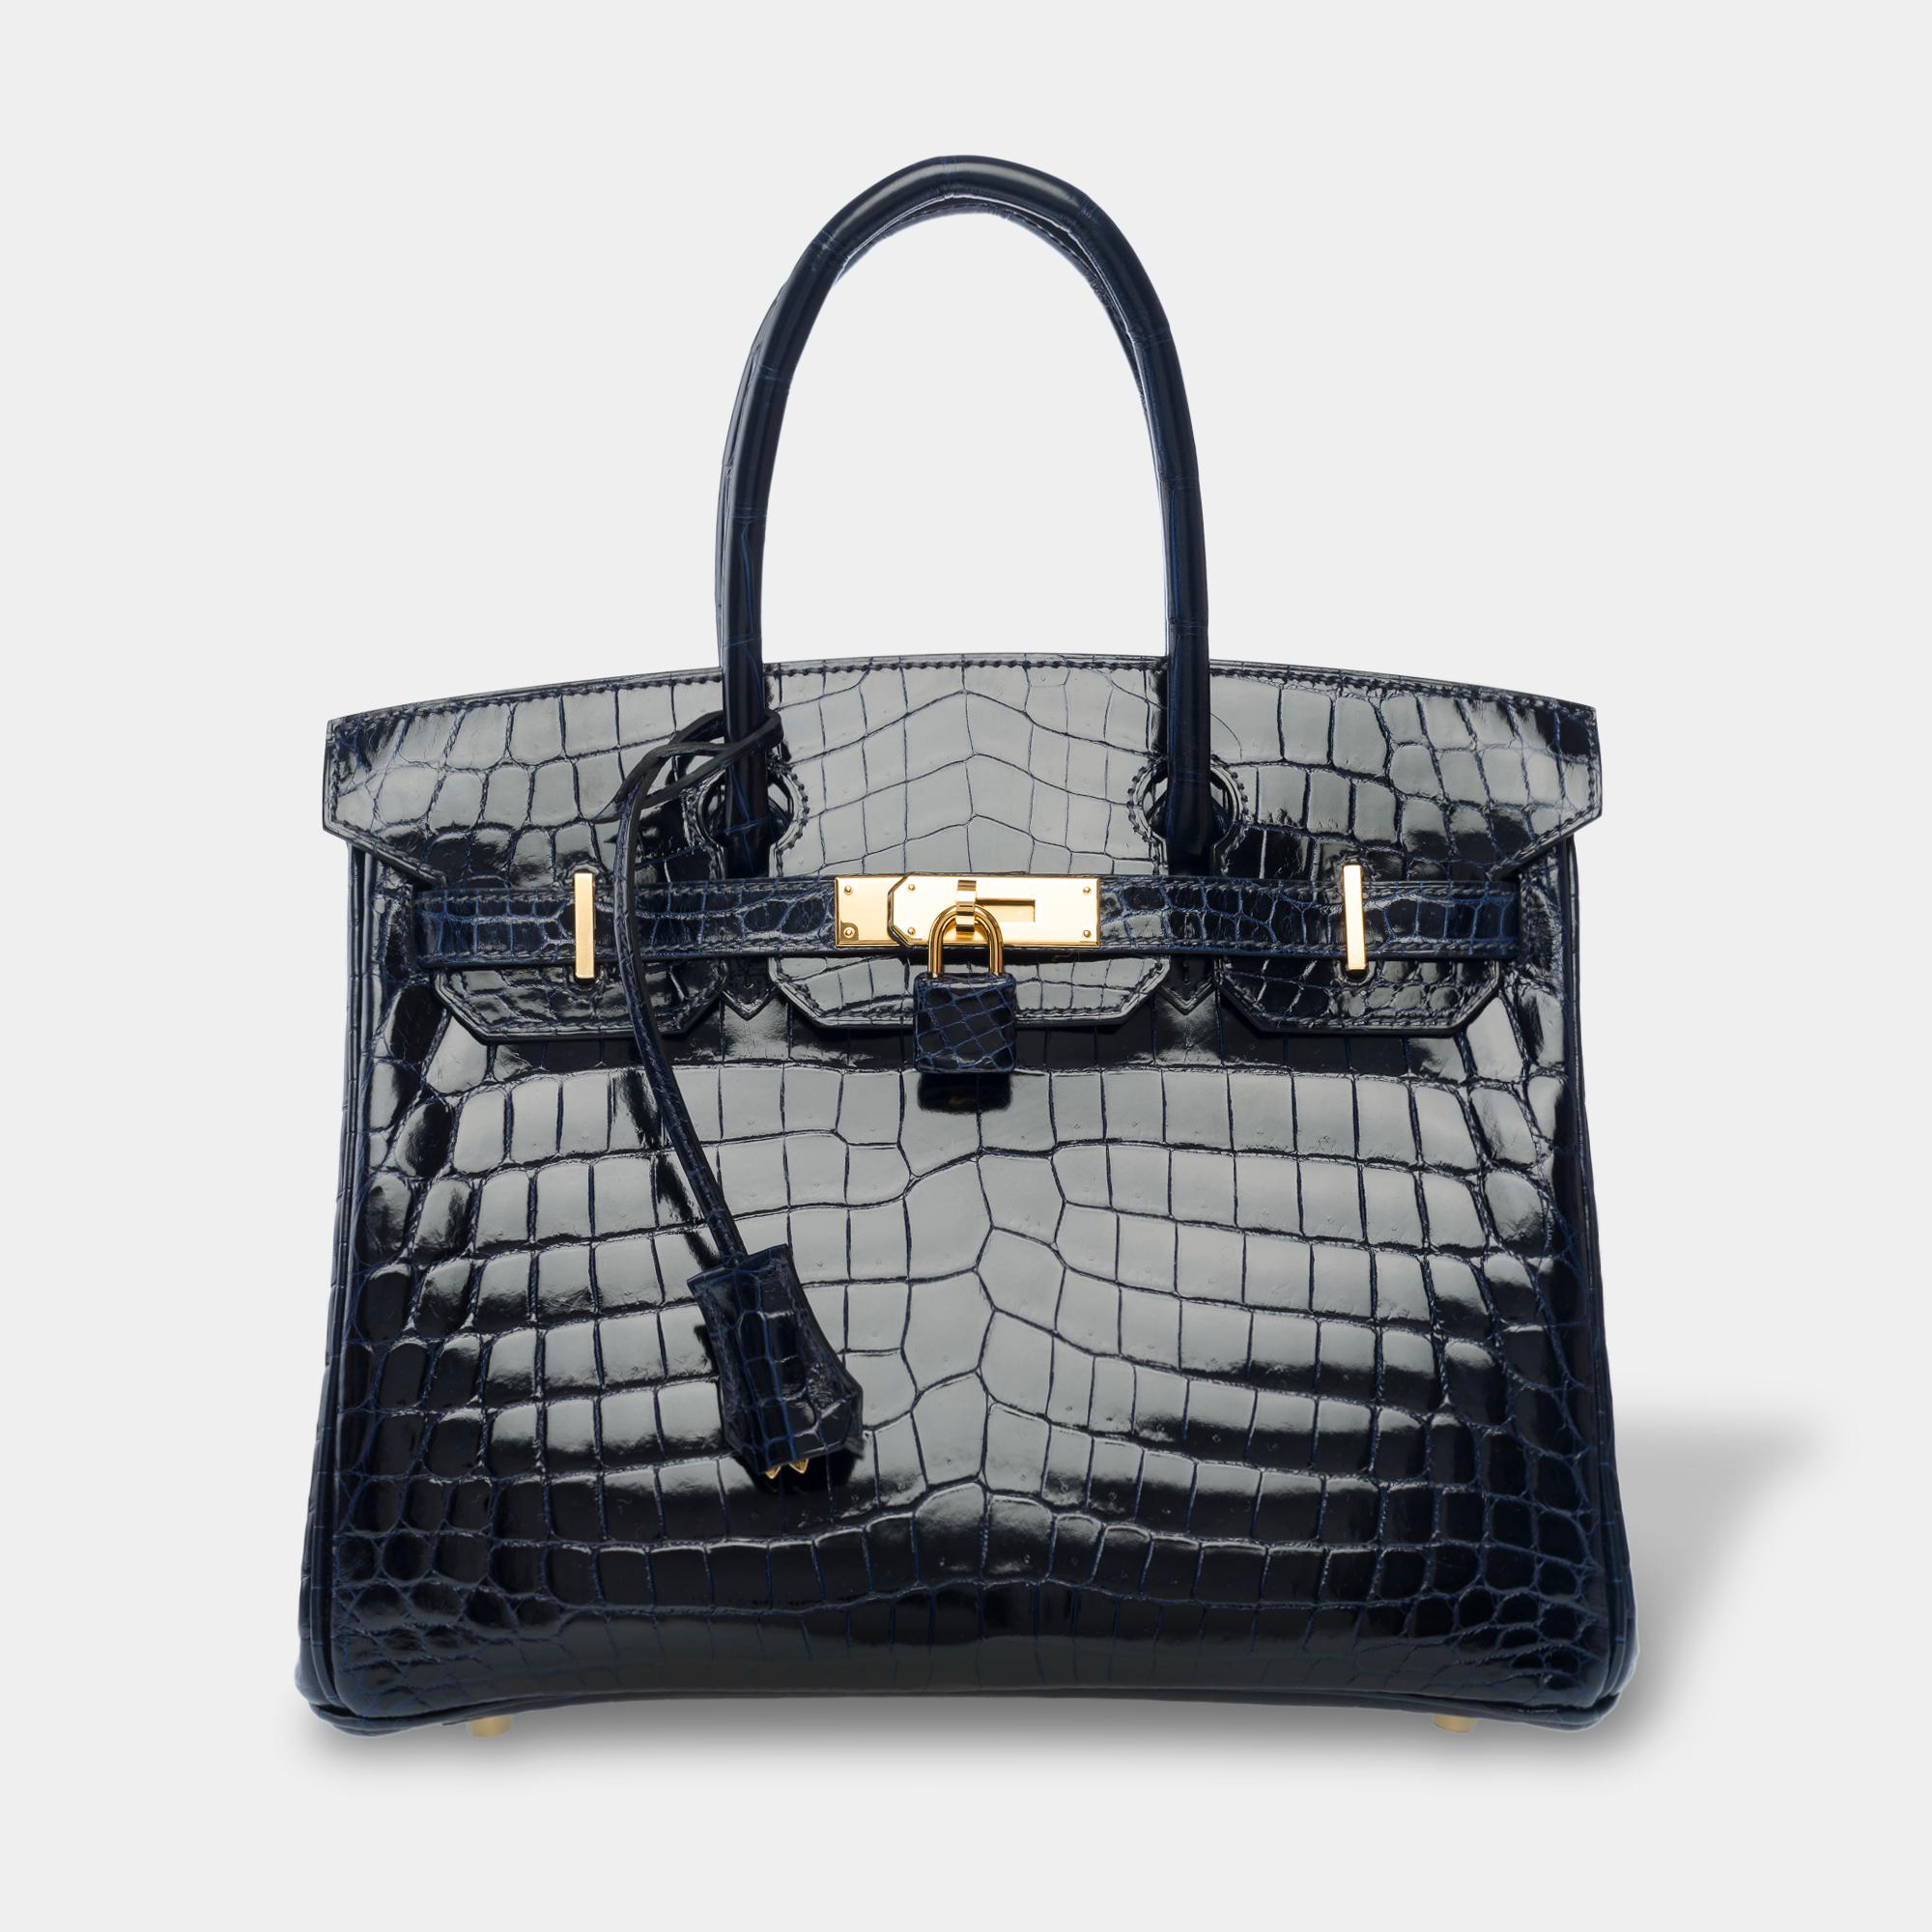 Amazing and Rare Hermes Birkin 30 handbag in shiny Navy Blue Niloticus Crocodile, gold plated metal trim, double handle in navy crocodile for a hand carry

Inner lining in blue leather, a zip pocket, a patch pocket  
Signature: 